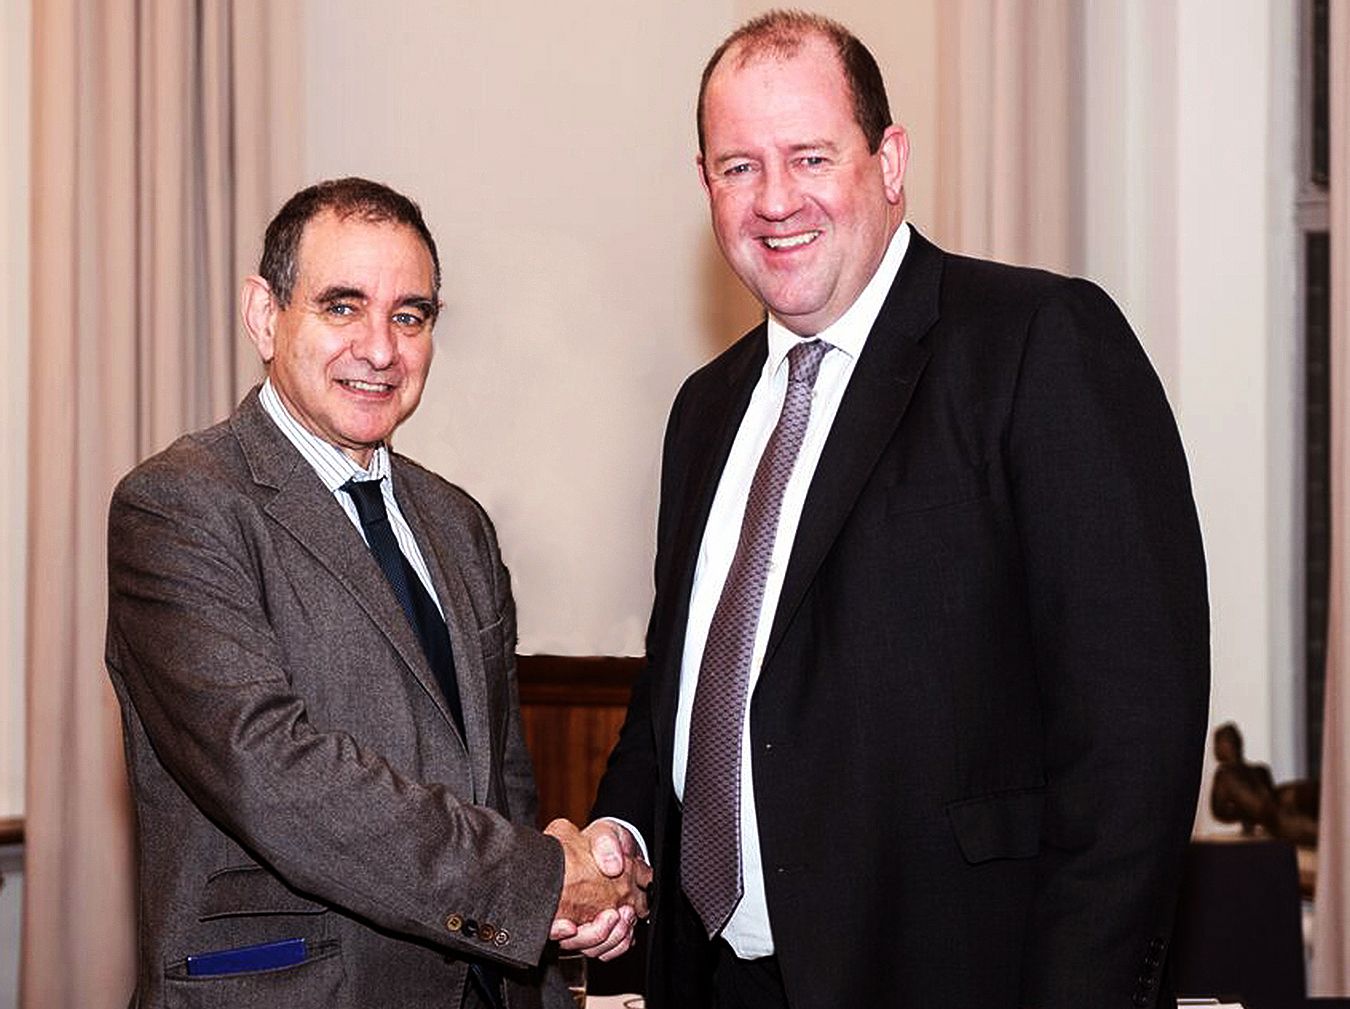 Kingston University Vice-Chancellor Professor Julius Weinberg shaking hands with Amey Plc Chief Executive Mell Ewell.